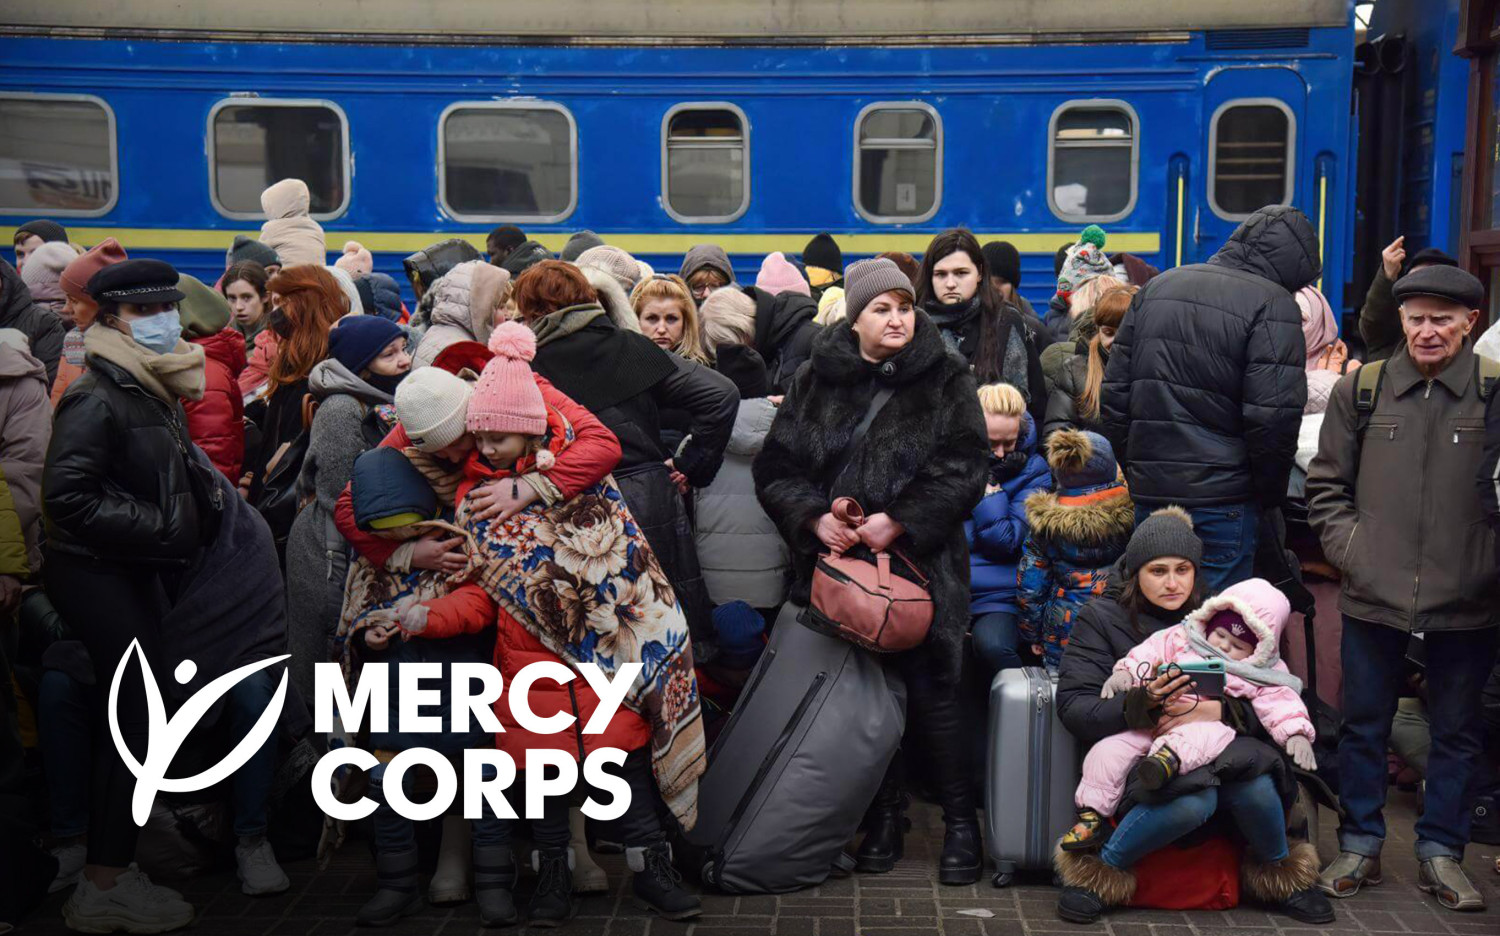 GoldenPeaks Capital Foundation supports Mercy Corps in the Ukraine